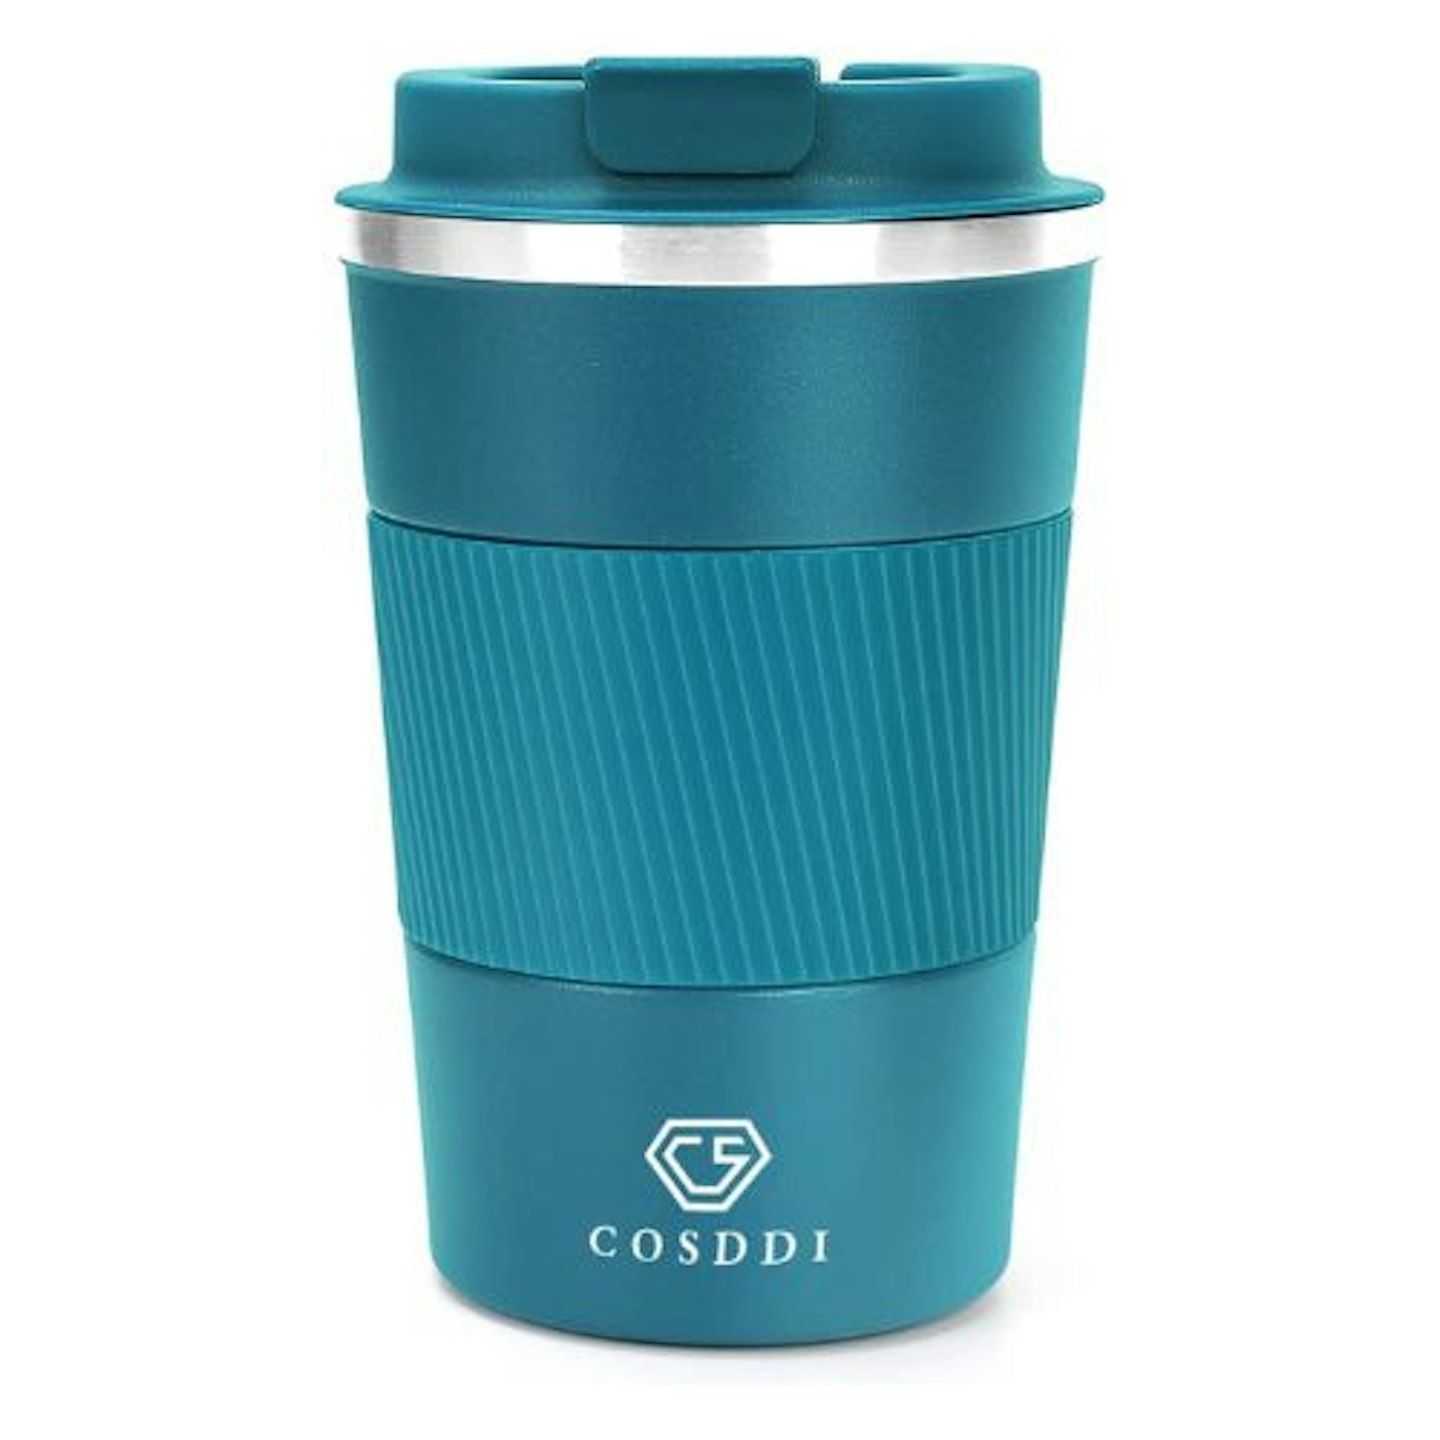 https://images.bauerhosting.com/affiliates/sites/10/2023/02/COSDDI-Travel-Mugs-Insulated-Coffee-Cup-with-Leakproof-Lid.jpg?auto=format&w=1440&q=80